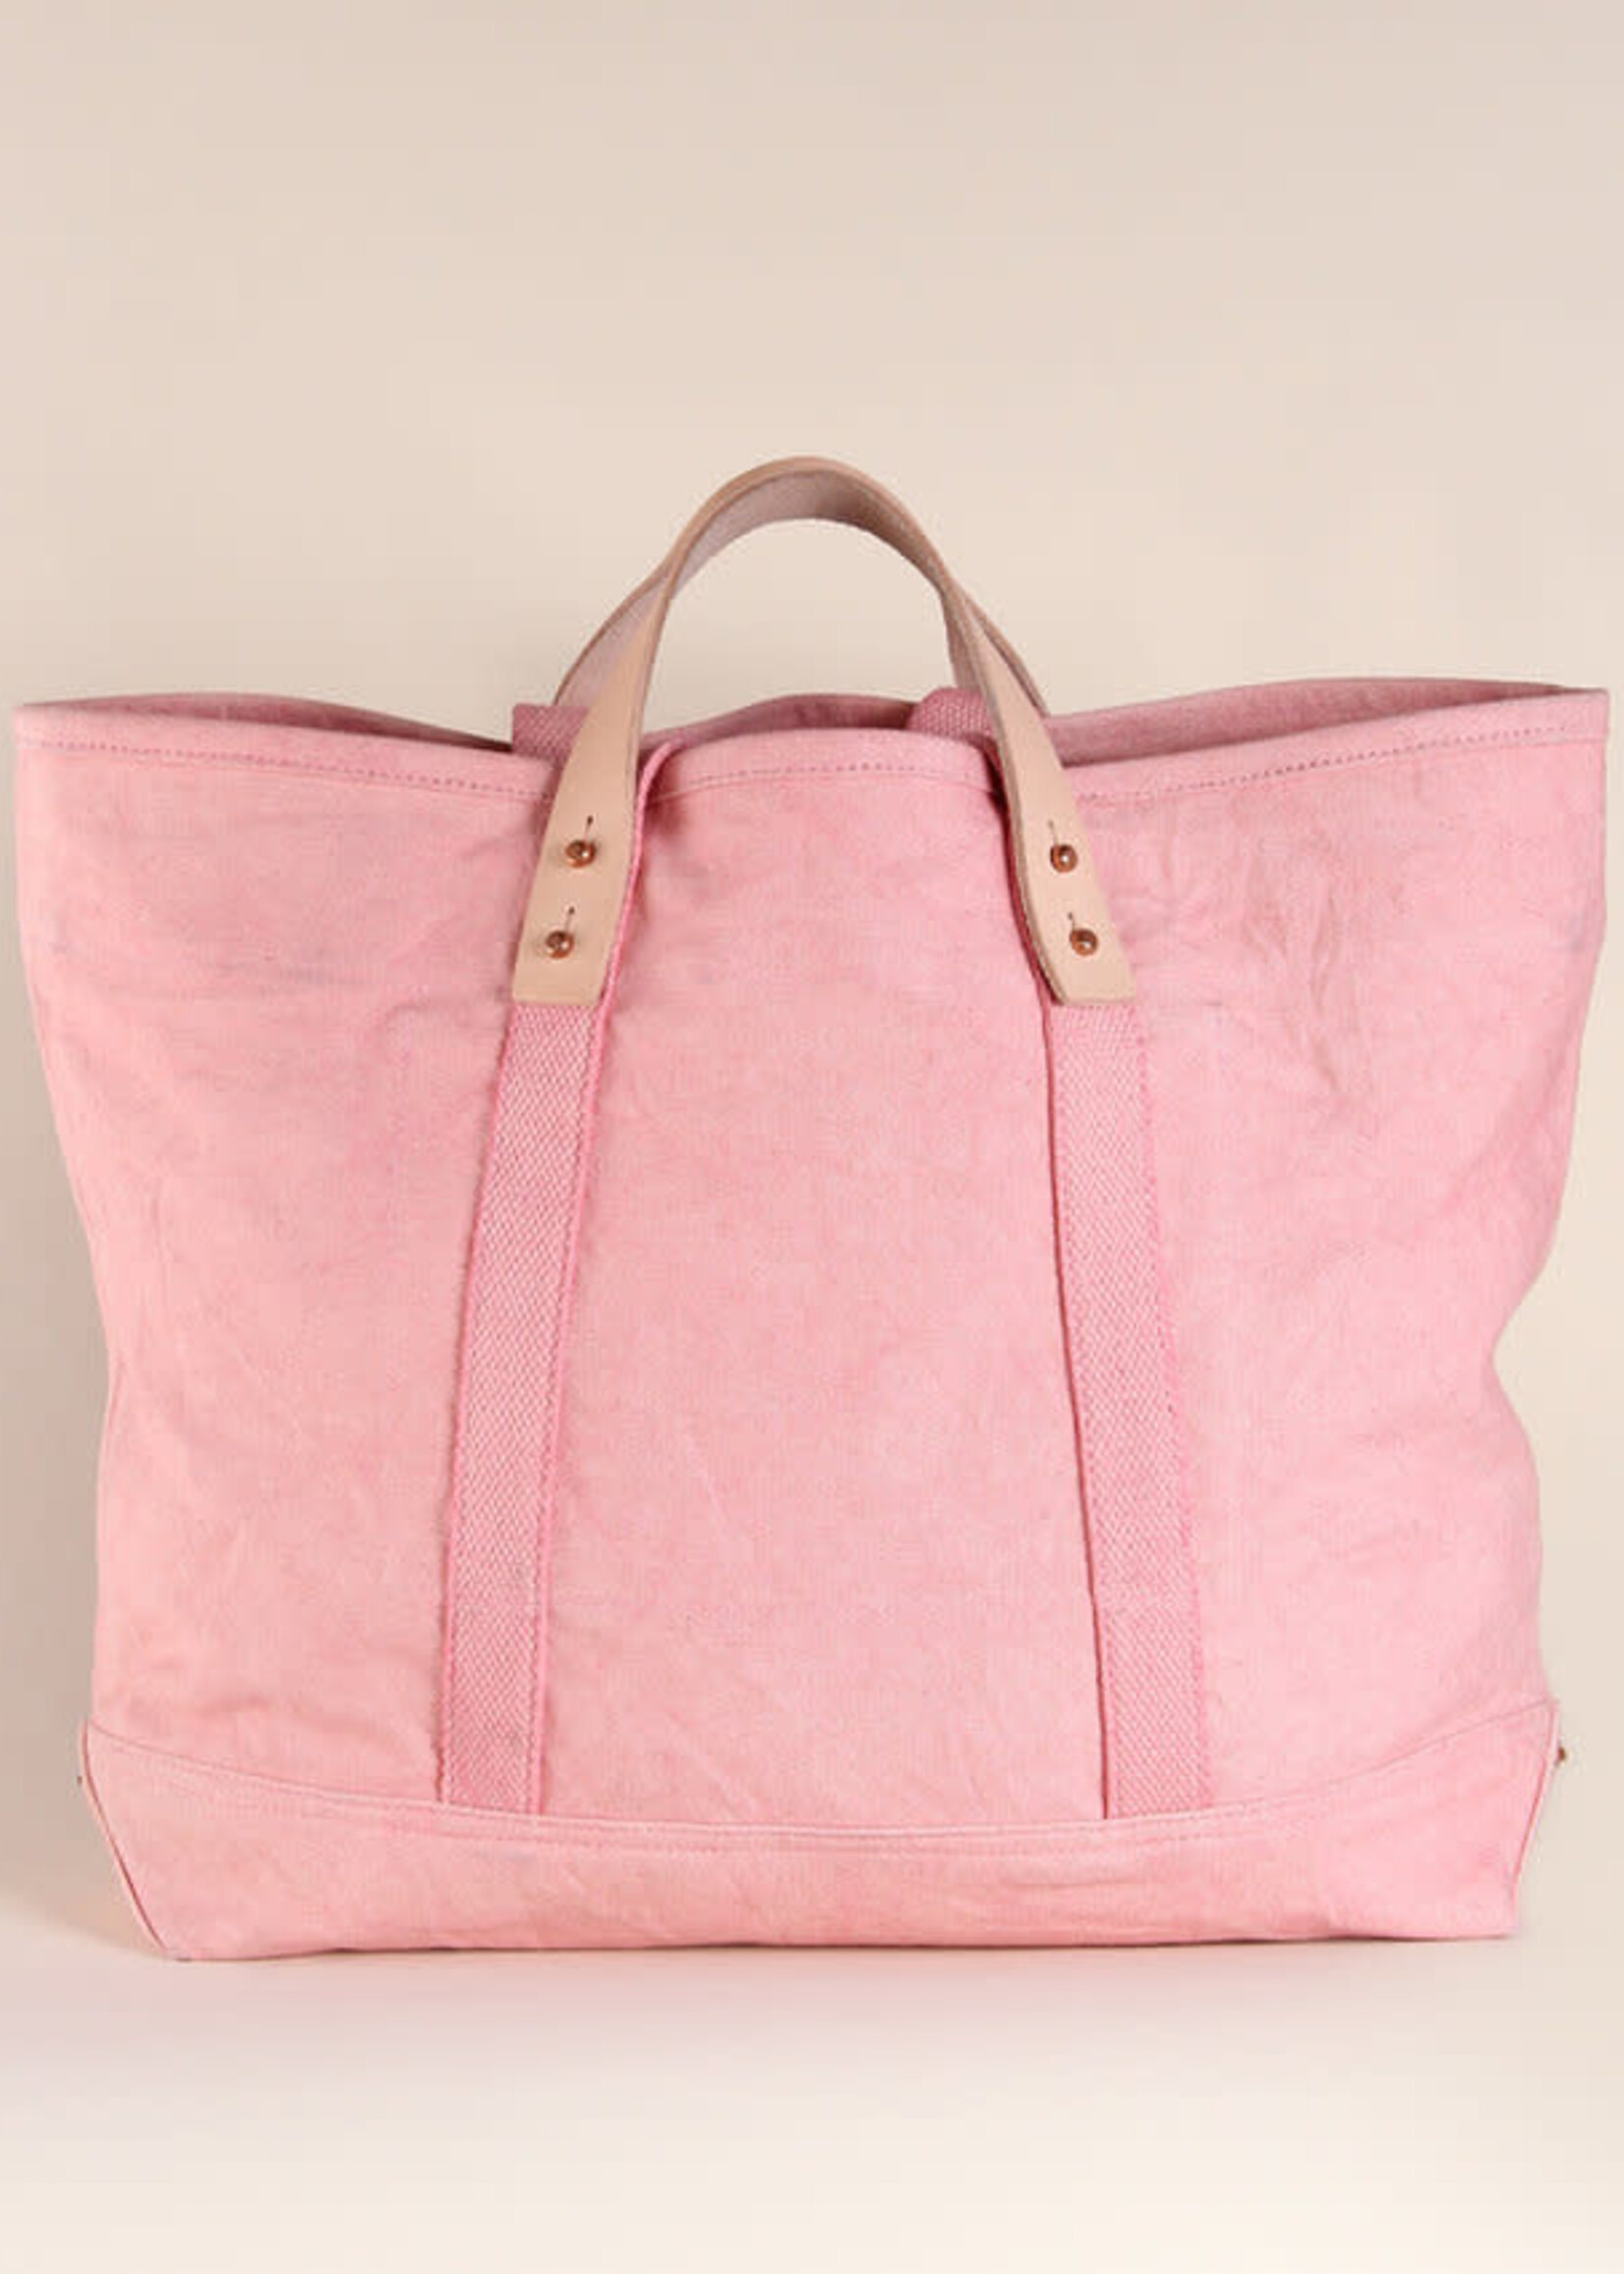 Shira Entis Small East West Tote